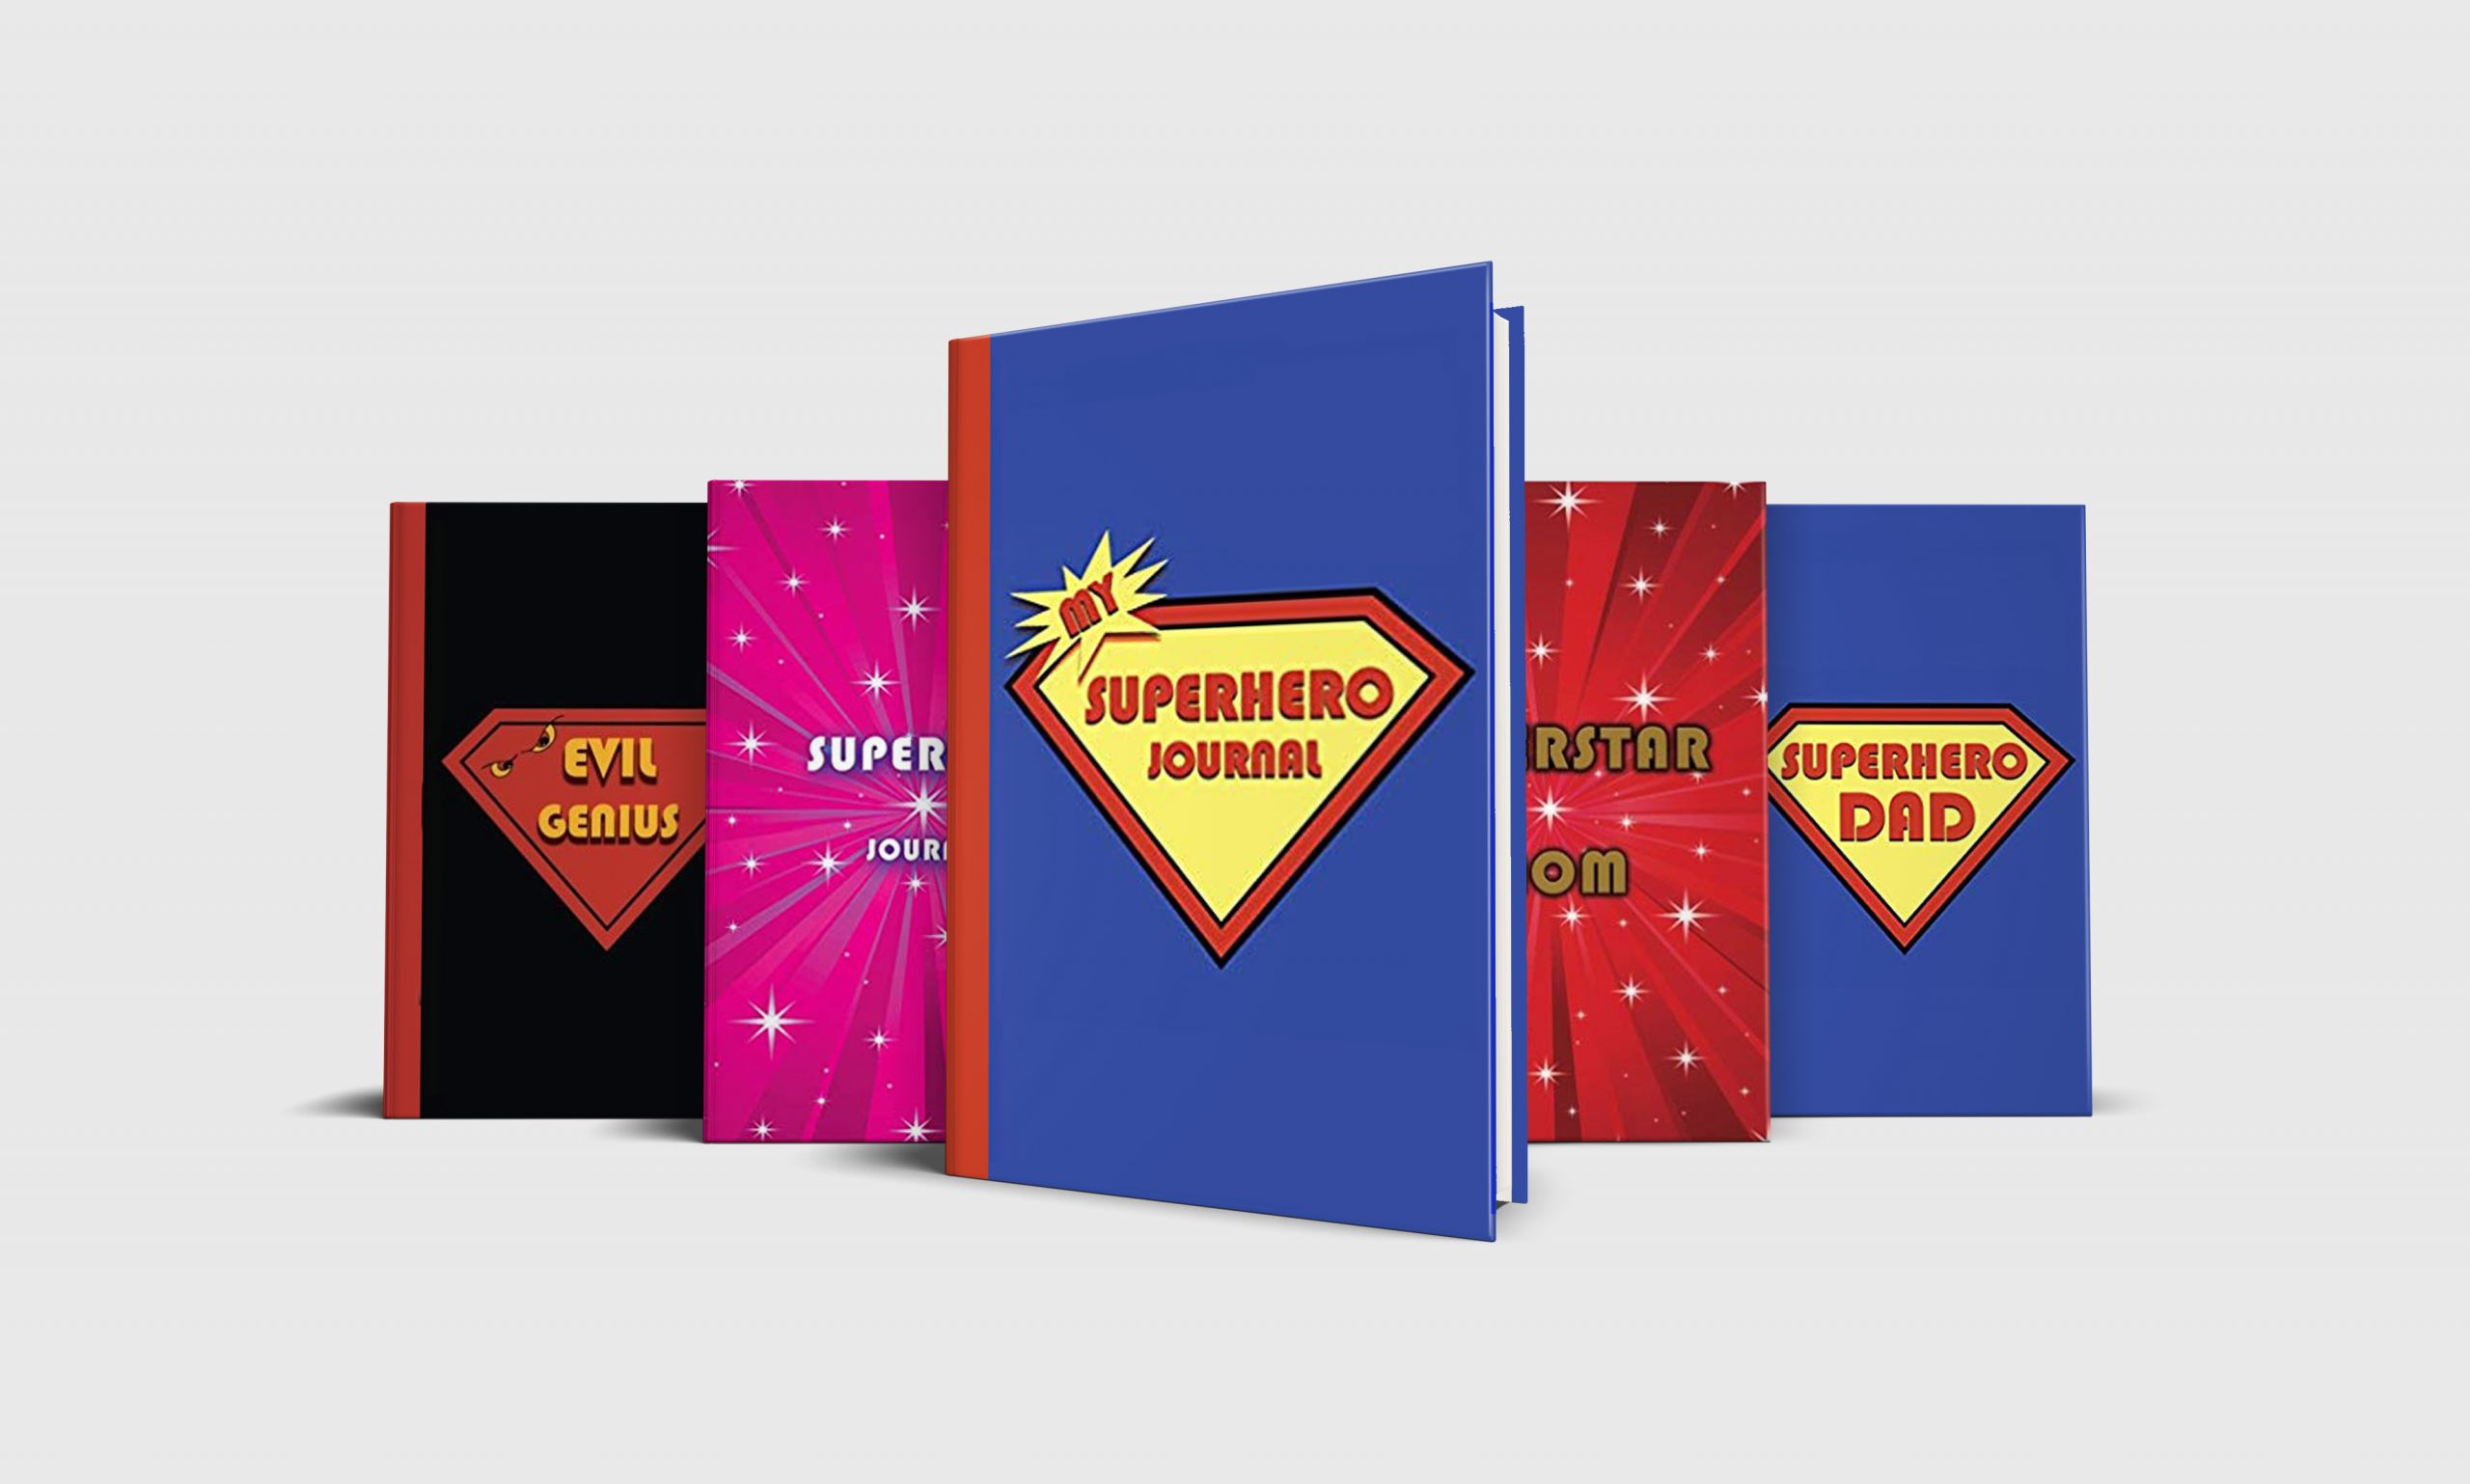 Five journals from the Superstar and Superhero series by Premise Content.